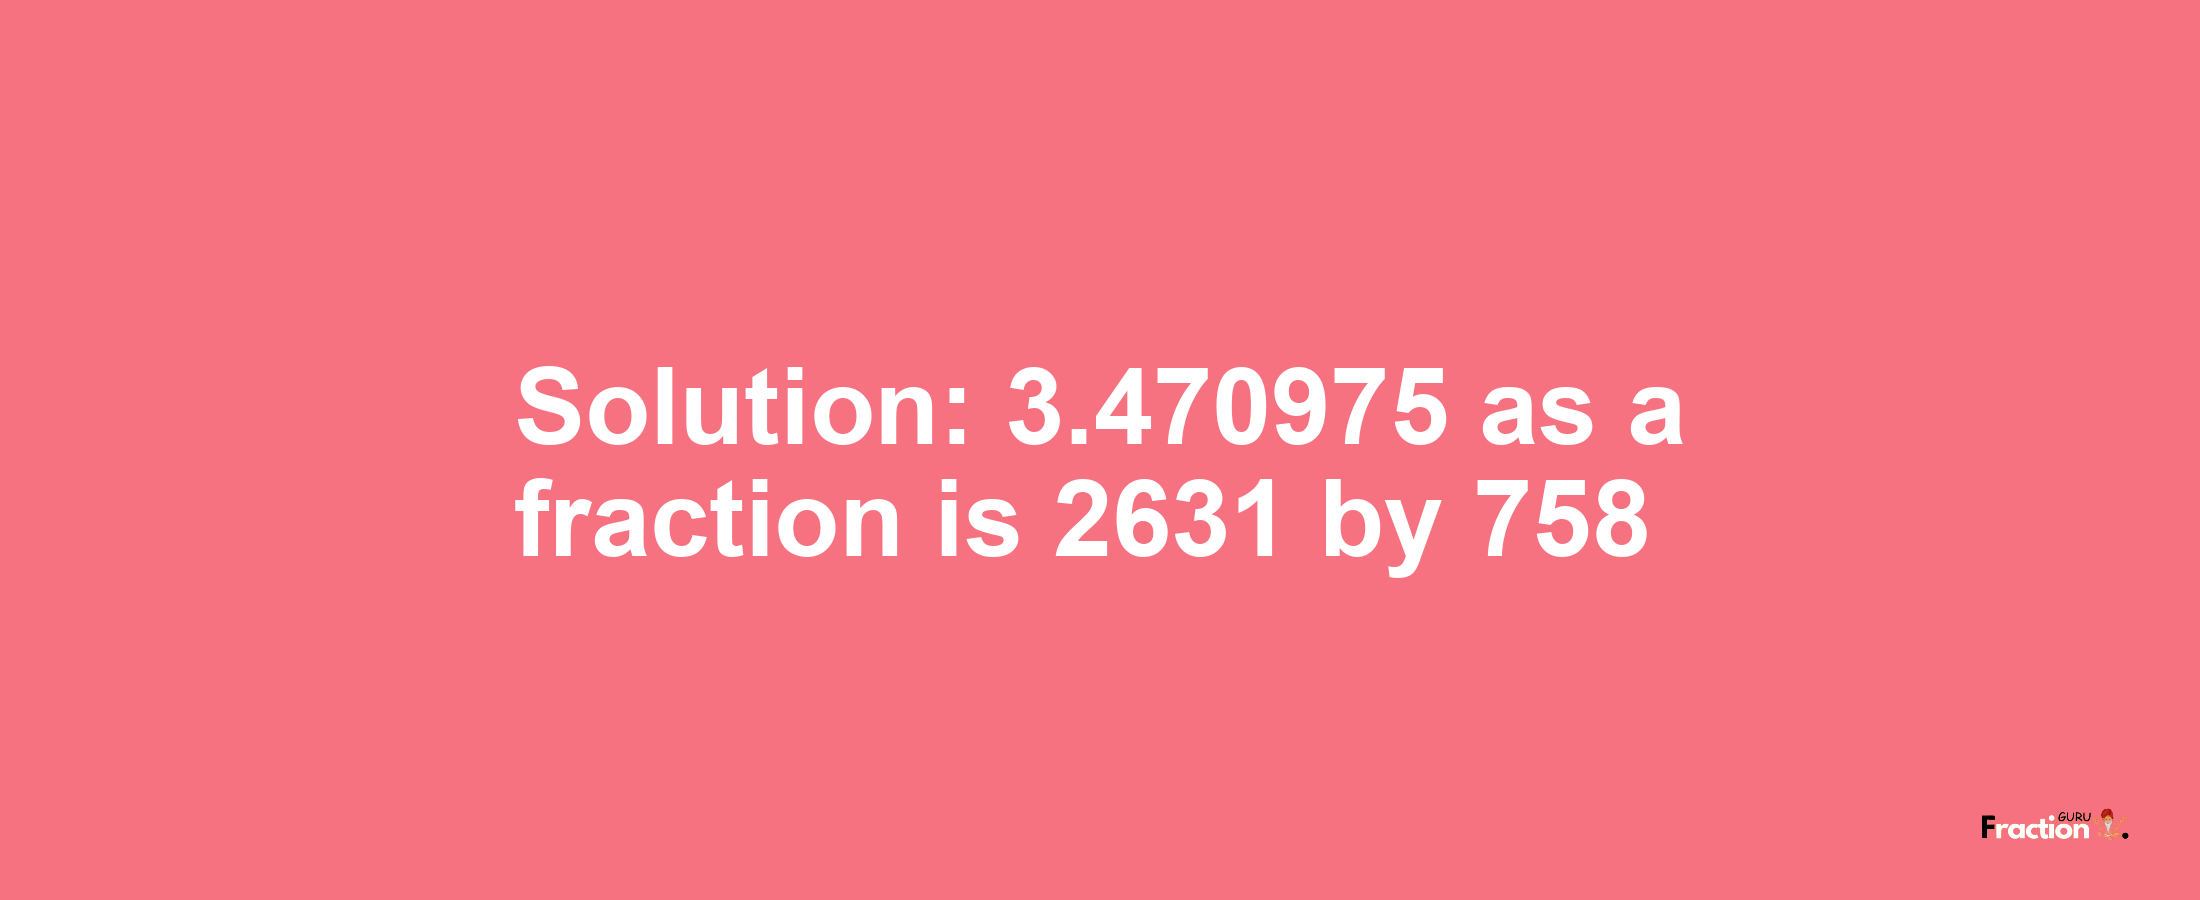 Solution:3.470975 as a fraction is 2631/758